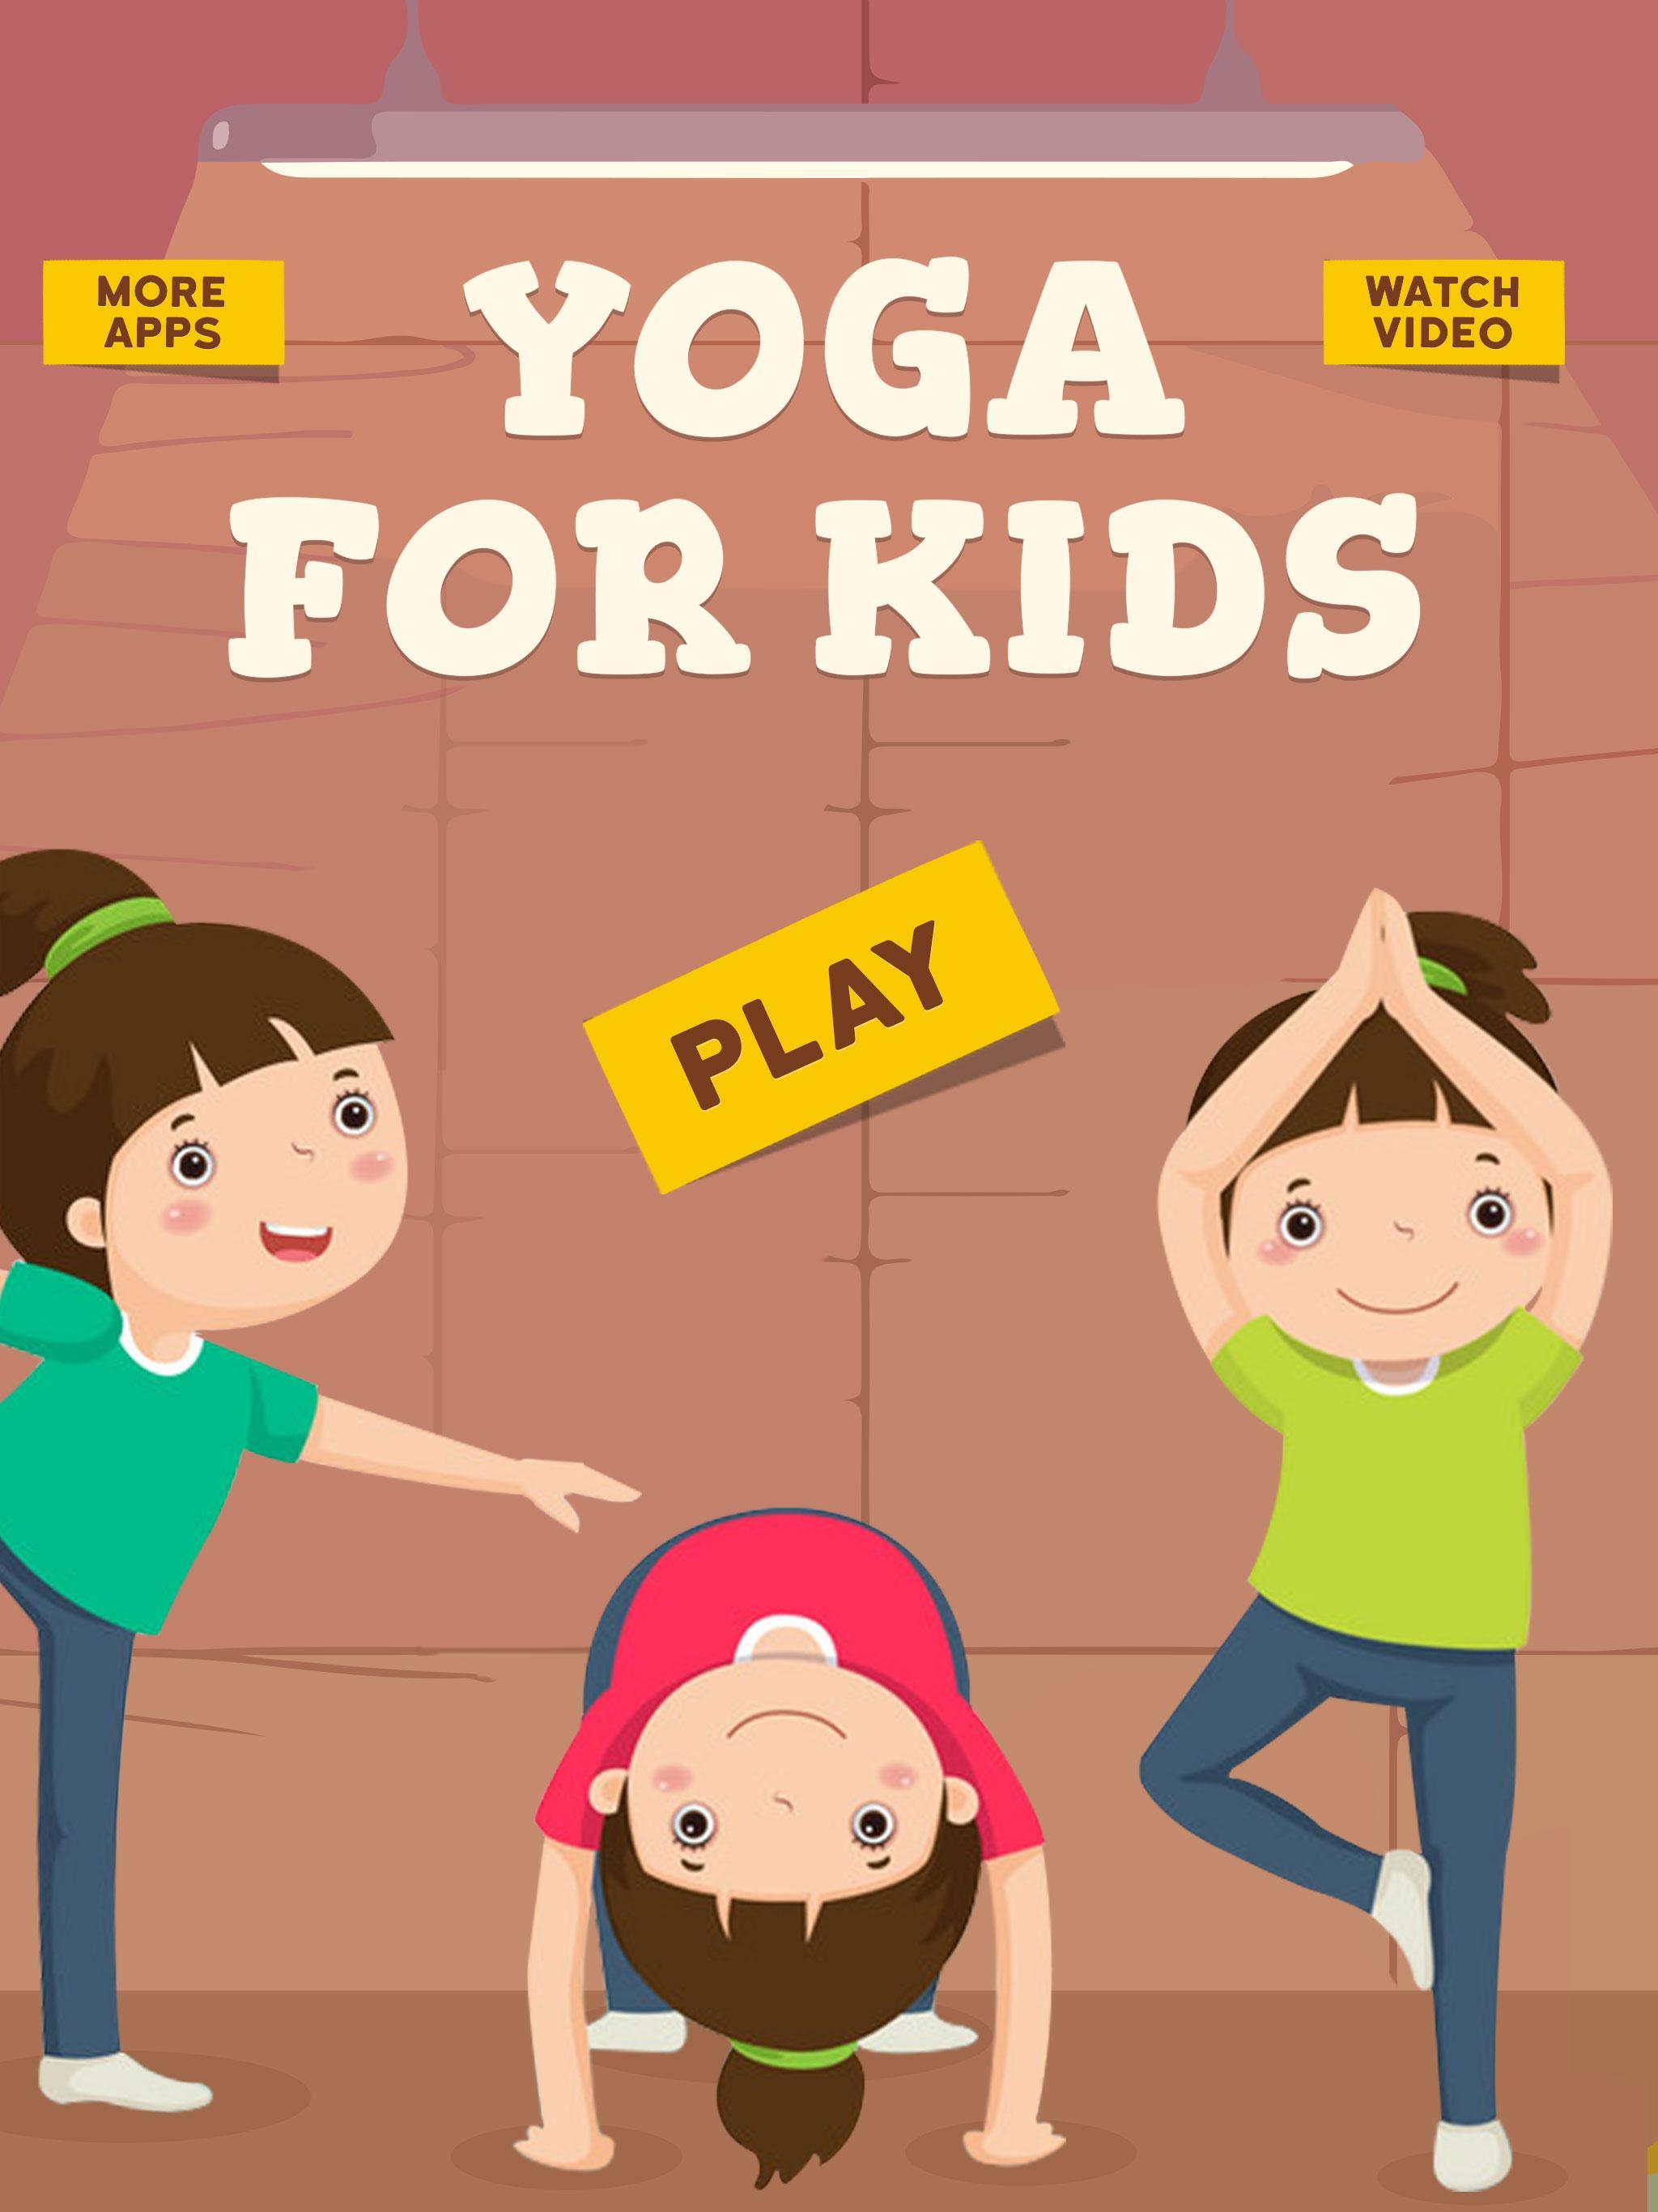 Yoga For Kids - Easy Yoga Poses for Kids Fitness for Android - APK Download